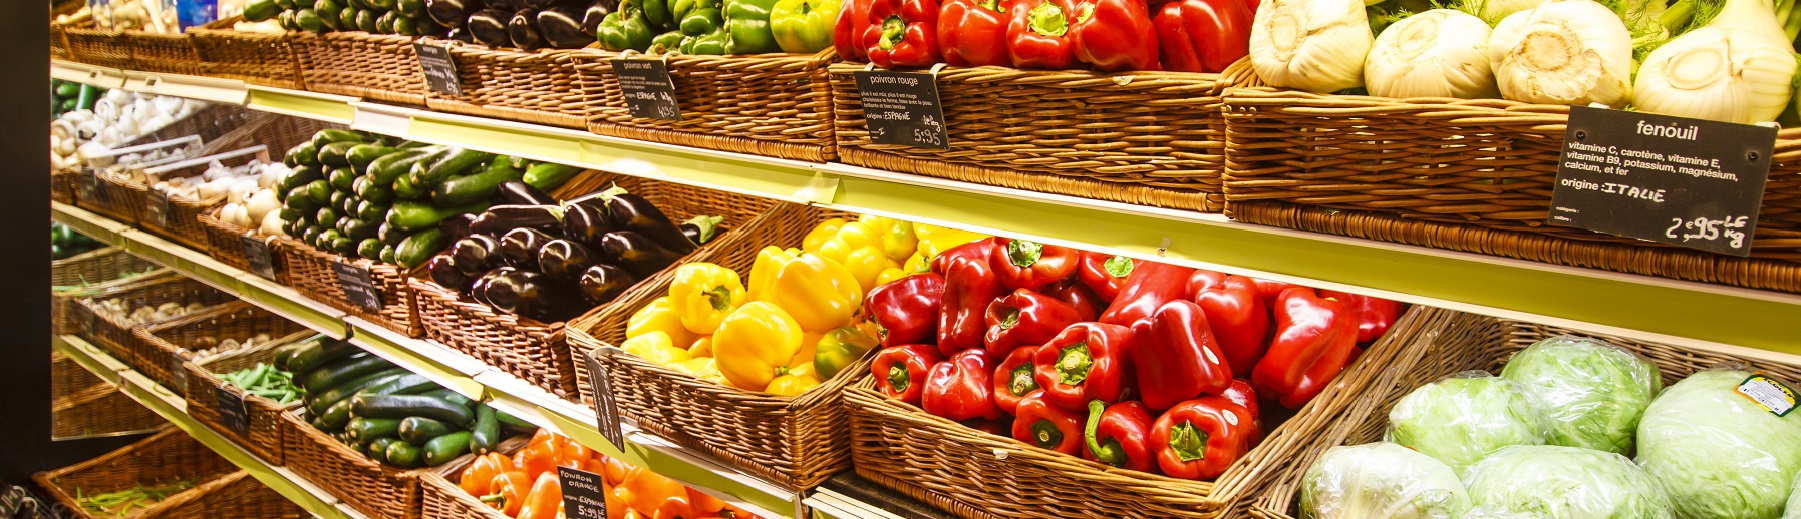 Many types of fresh produce in baskets on shelves